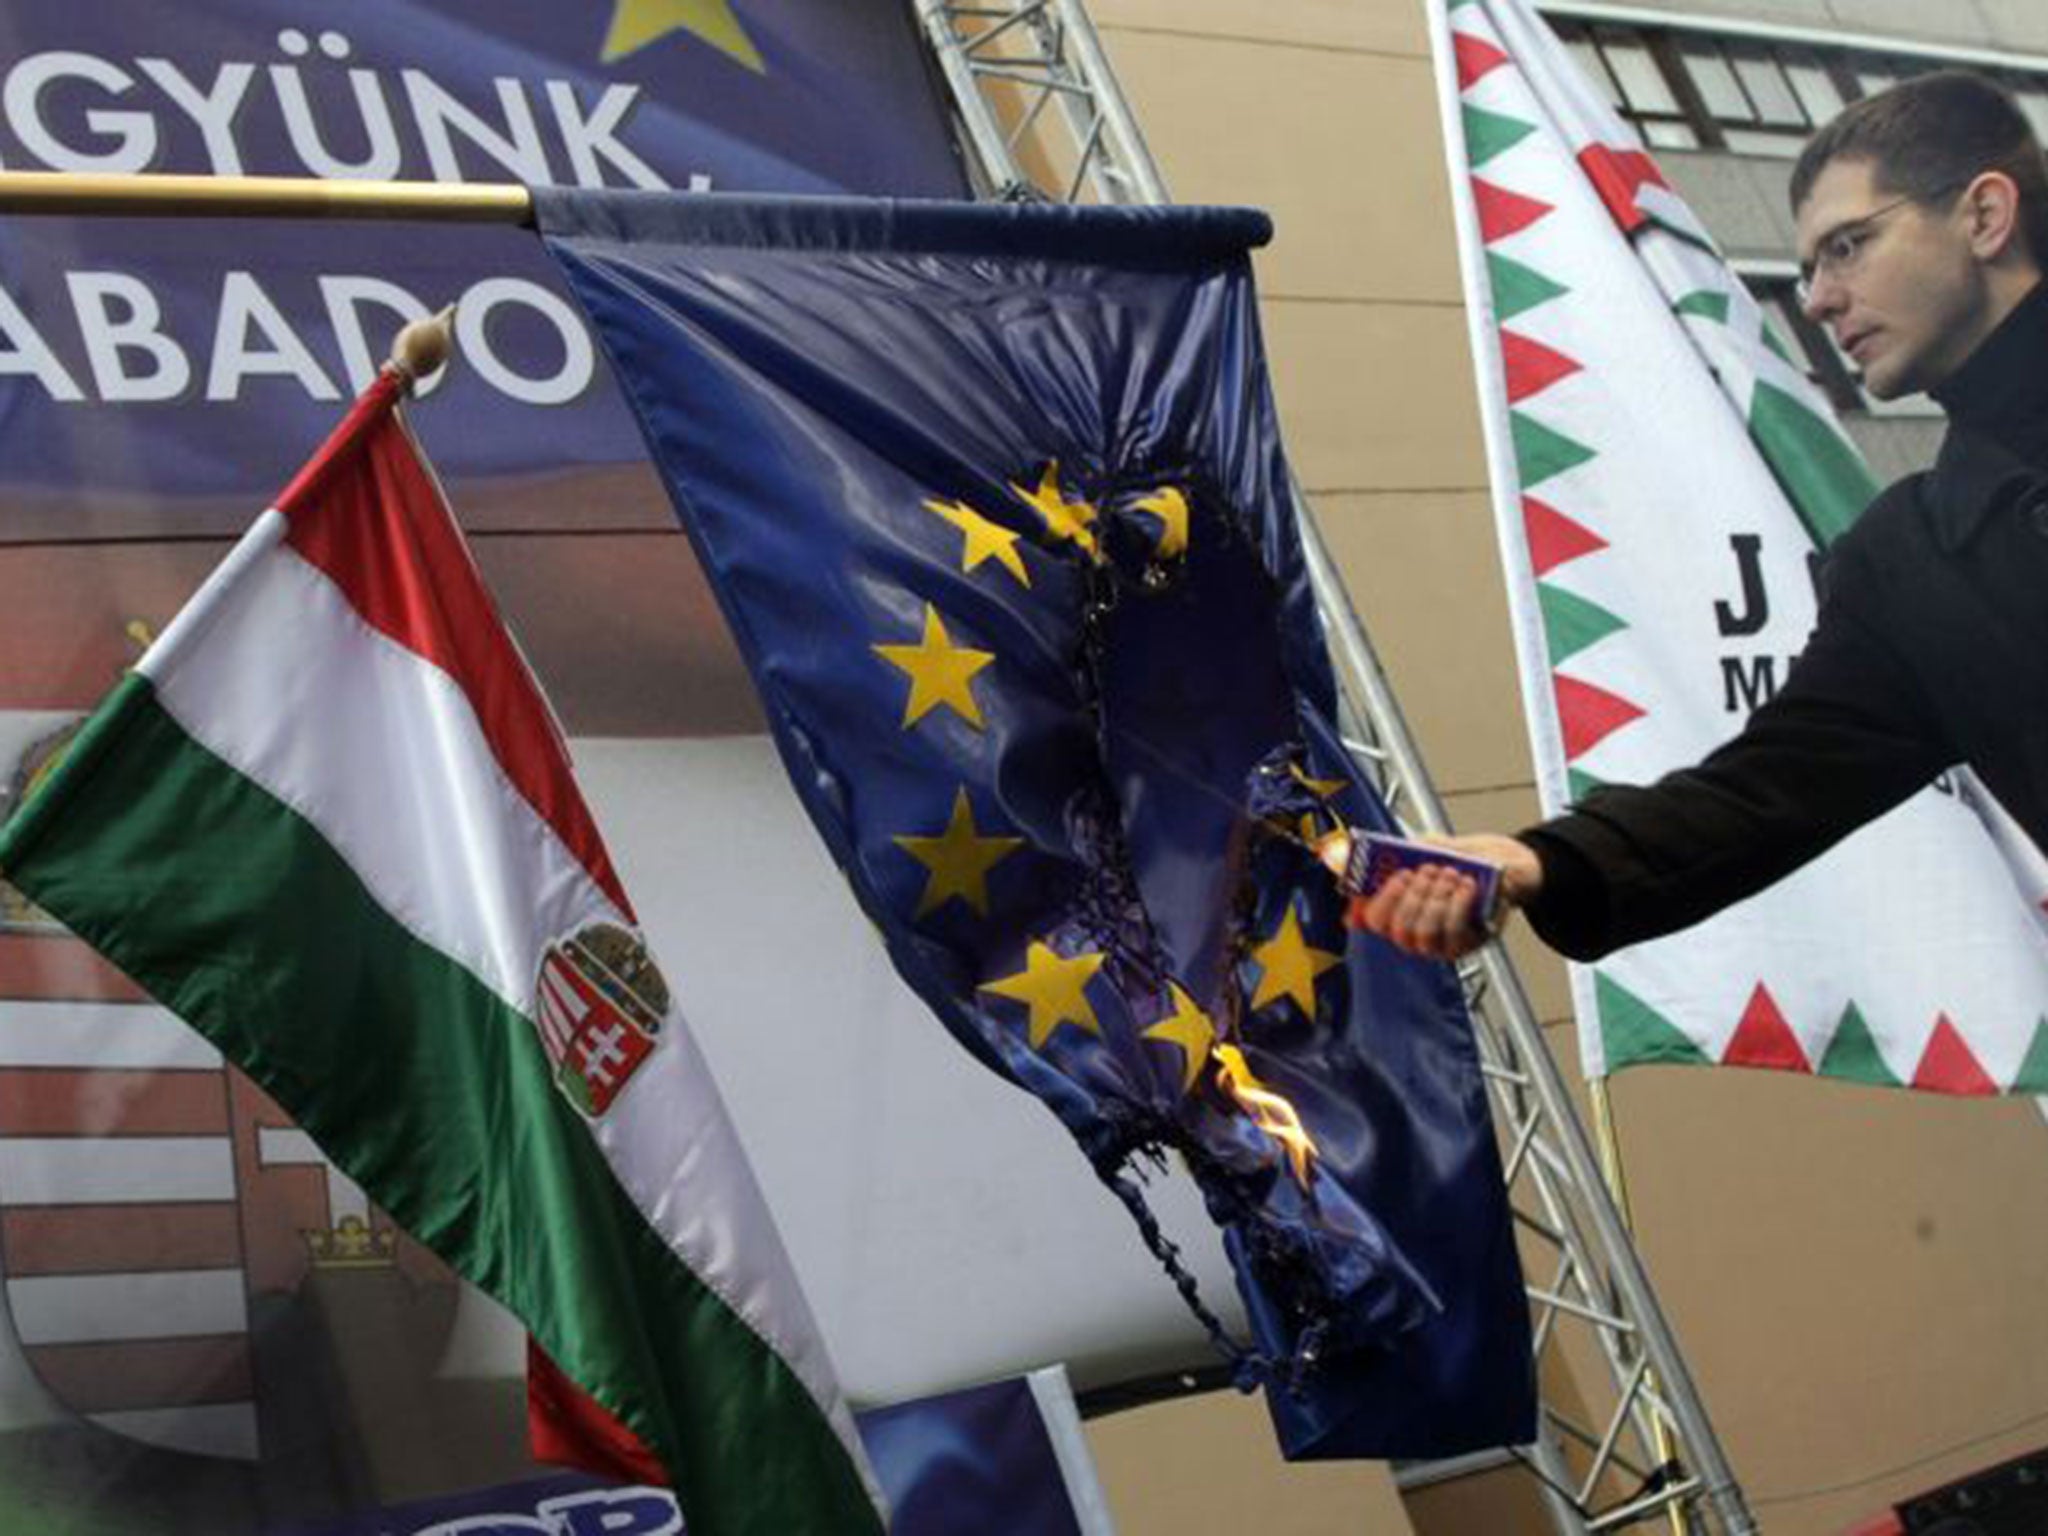 Anti-EU parties, such as Hungary’s Jobbik party, flourished at the European elections last month